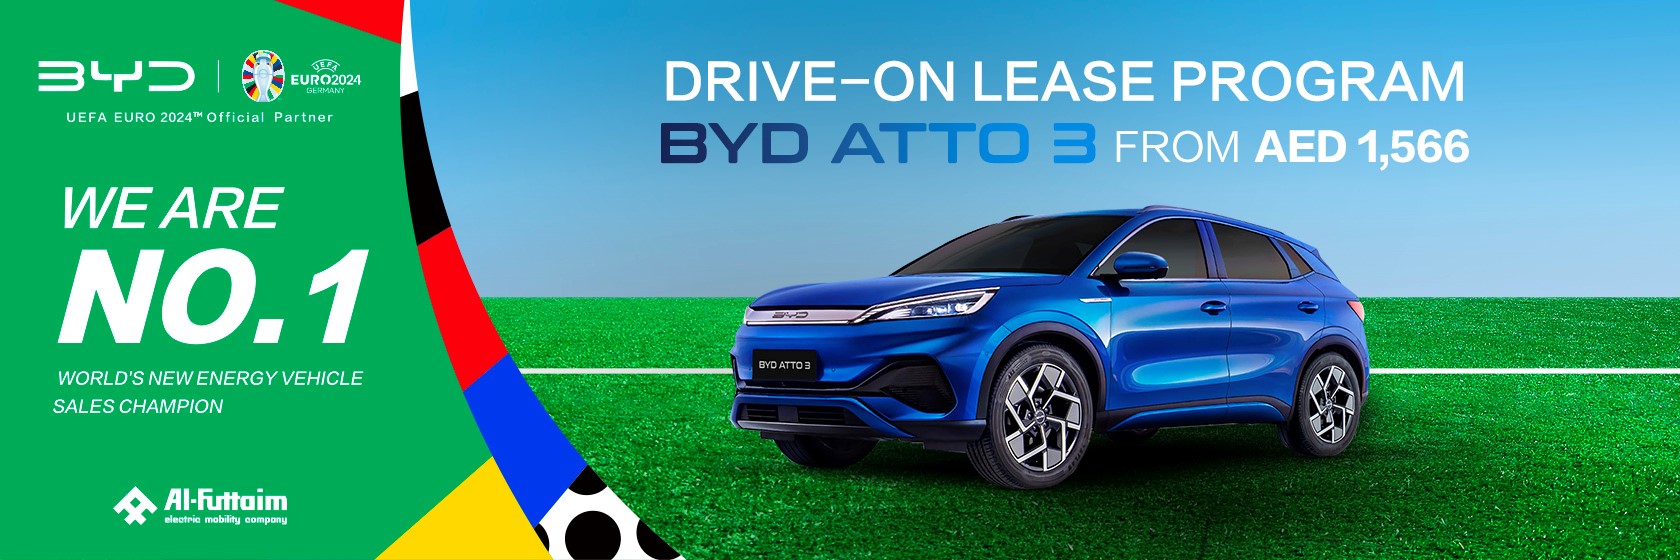 byd-atto-3-lease